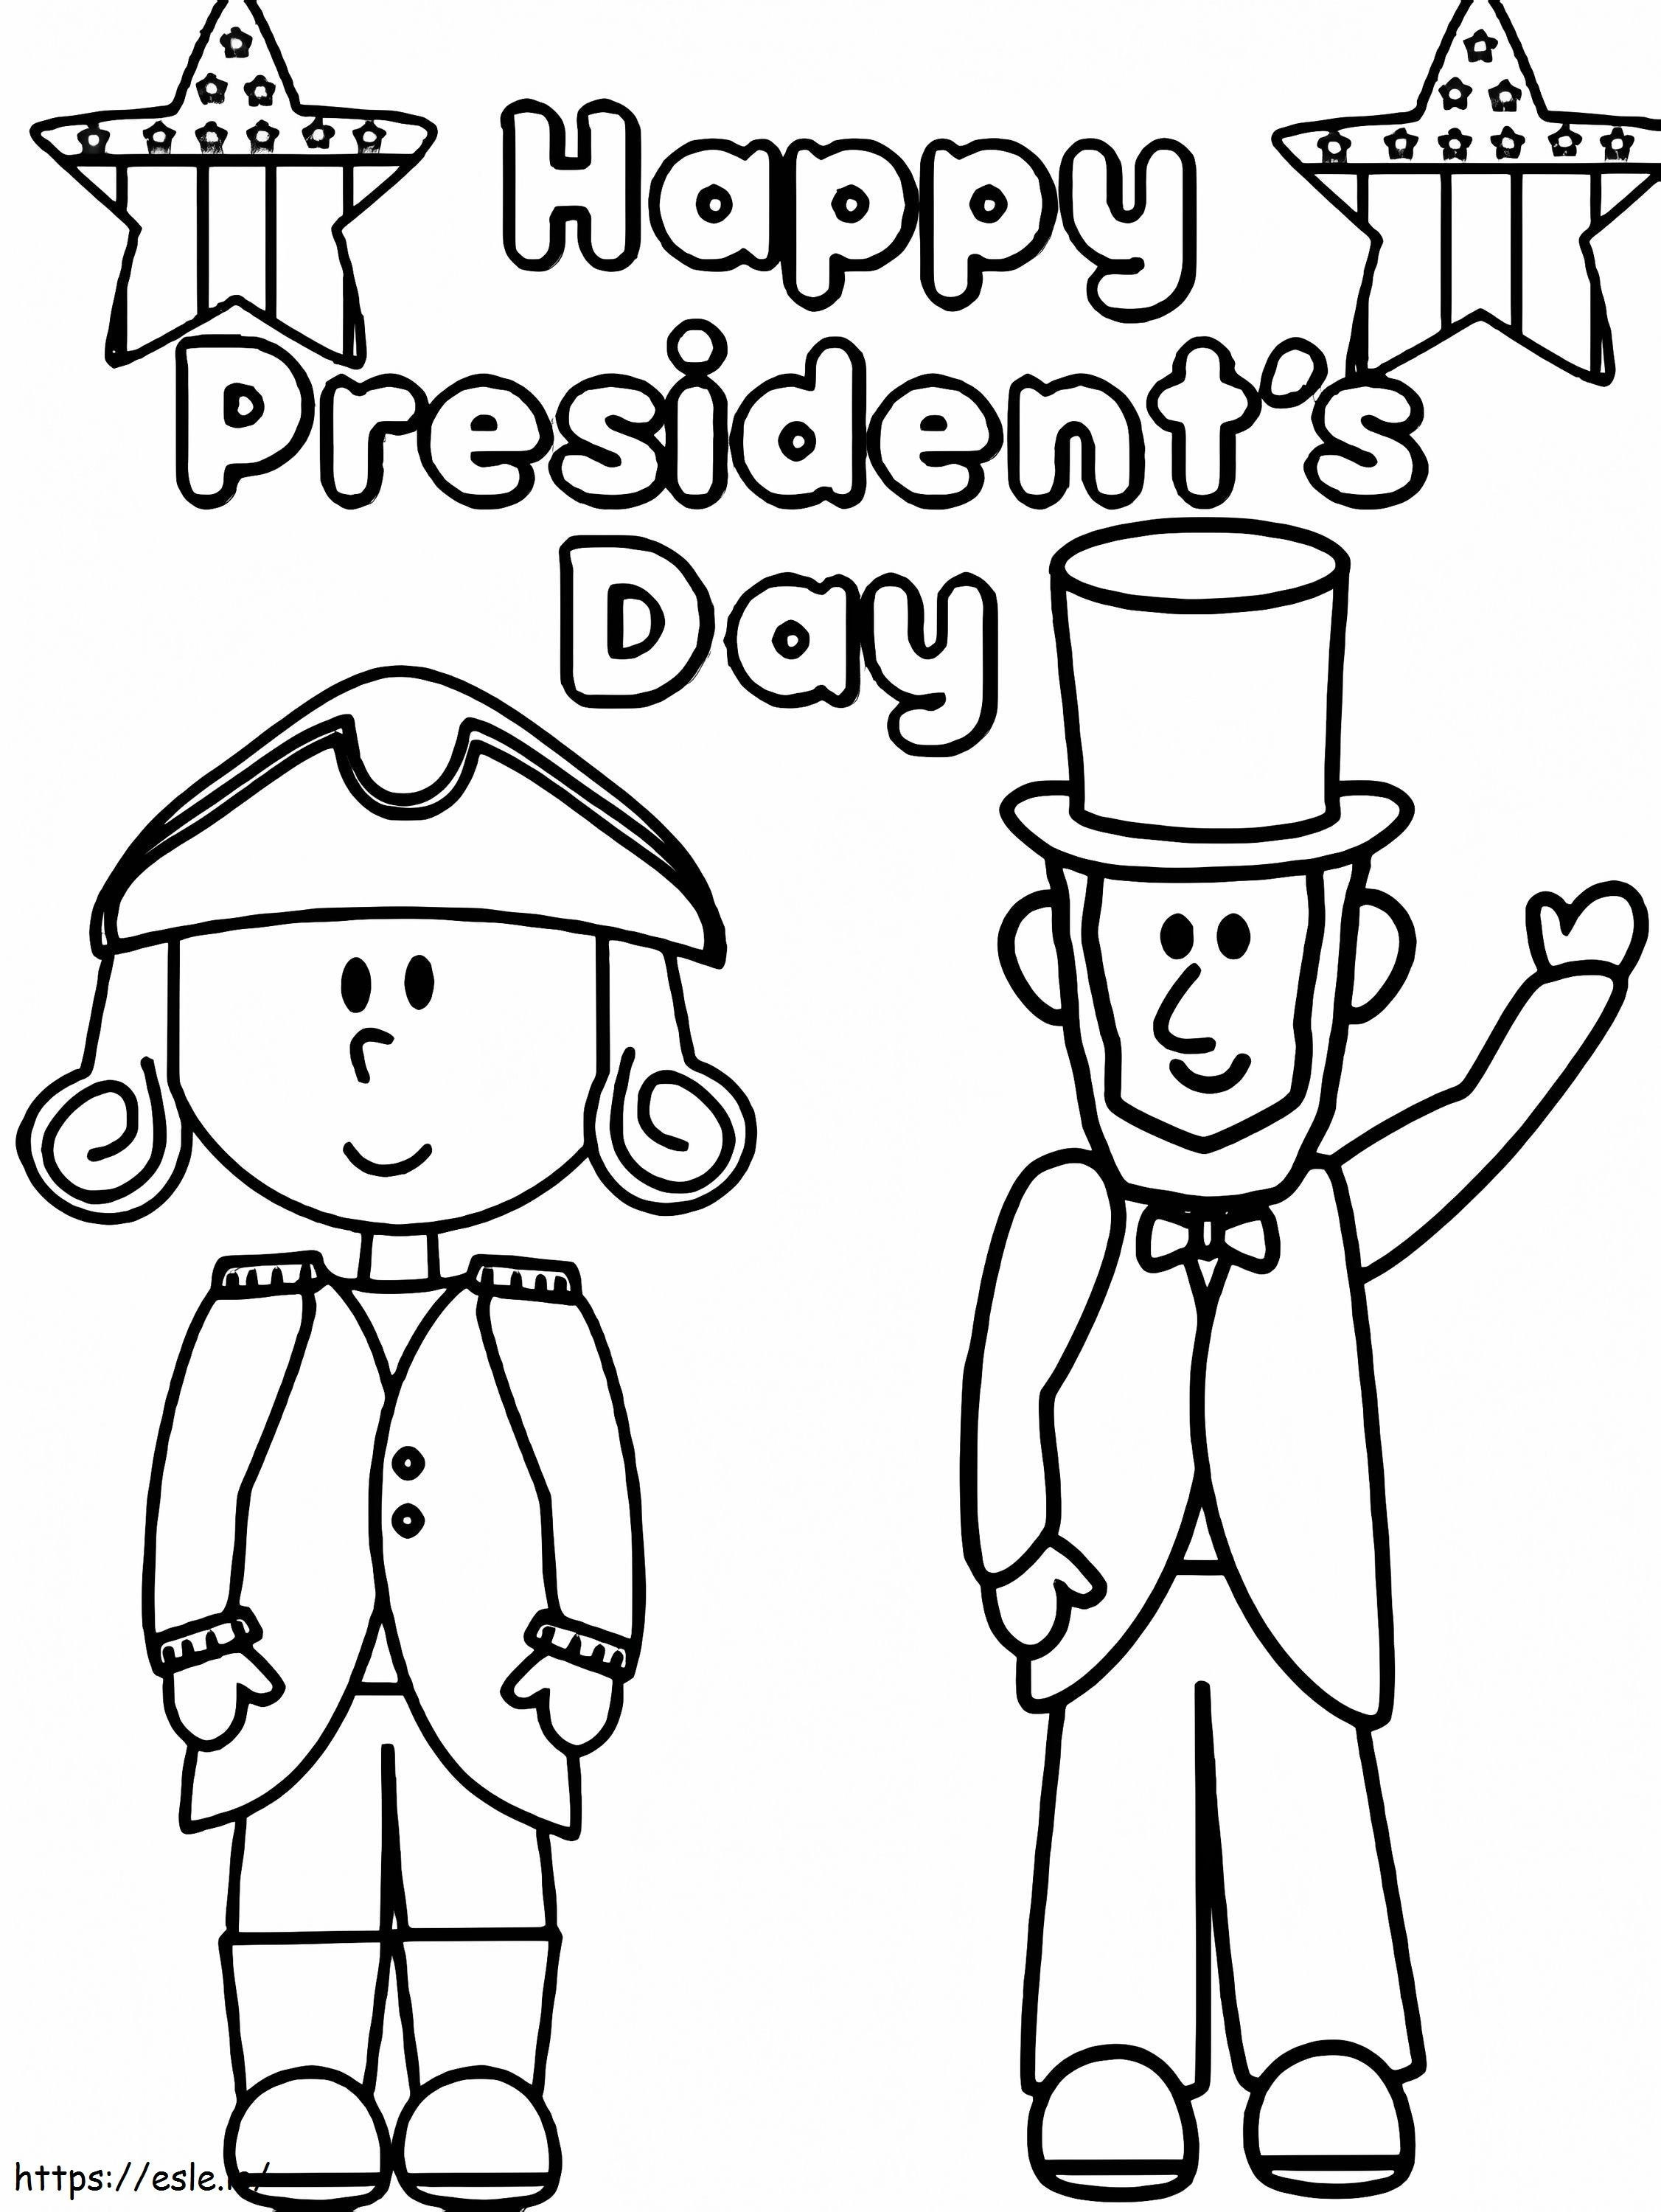 Happy Presidents Day 1 coloring page